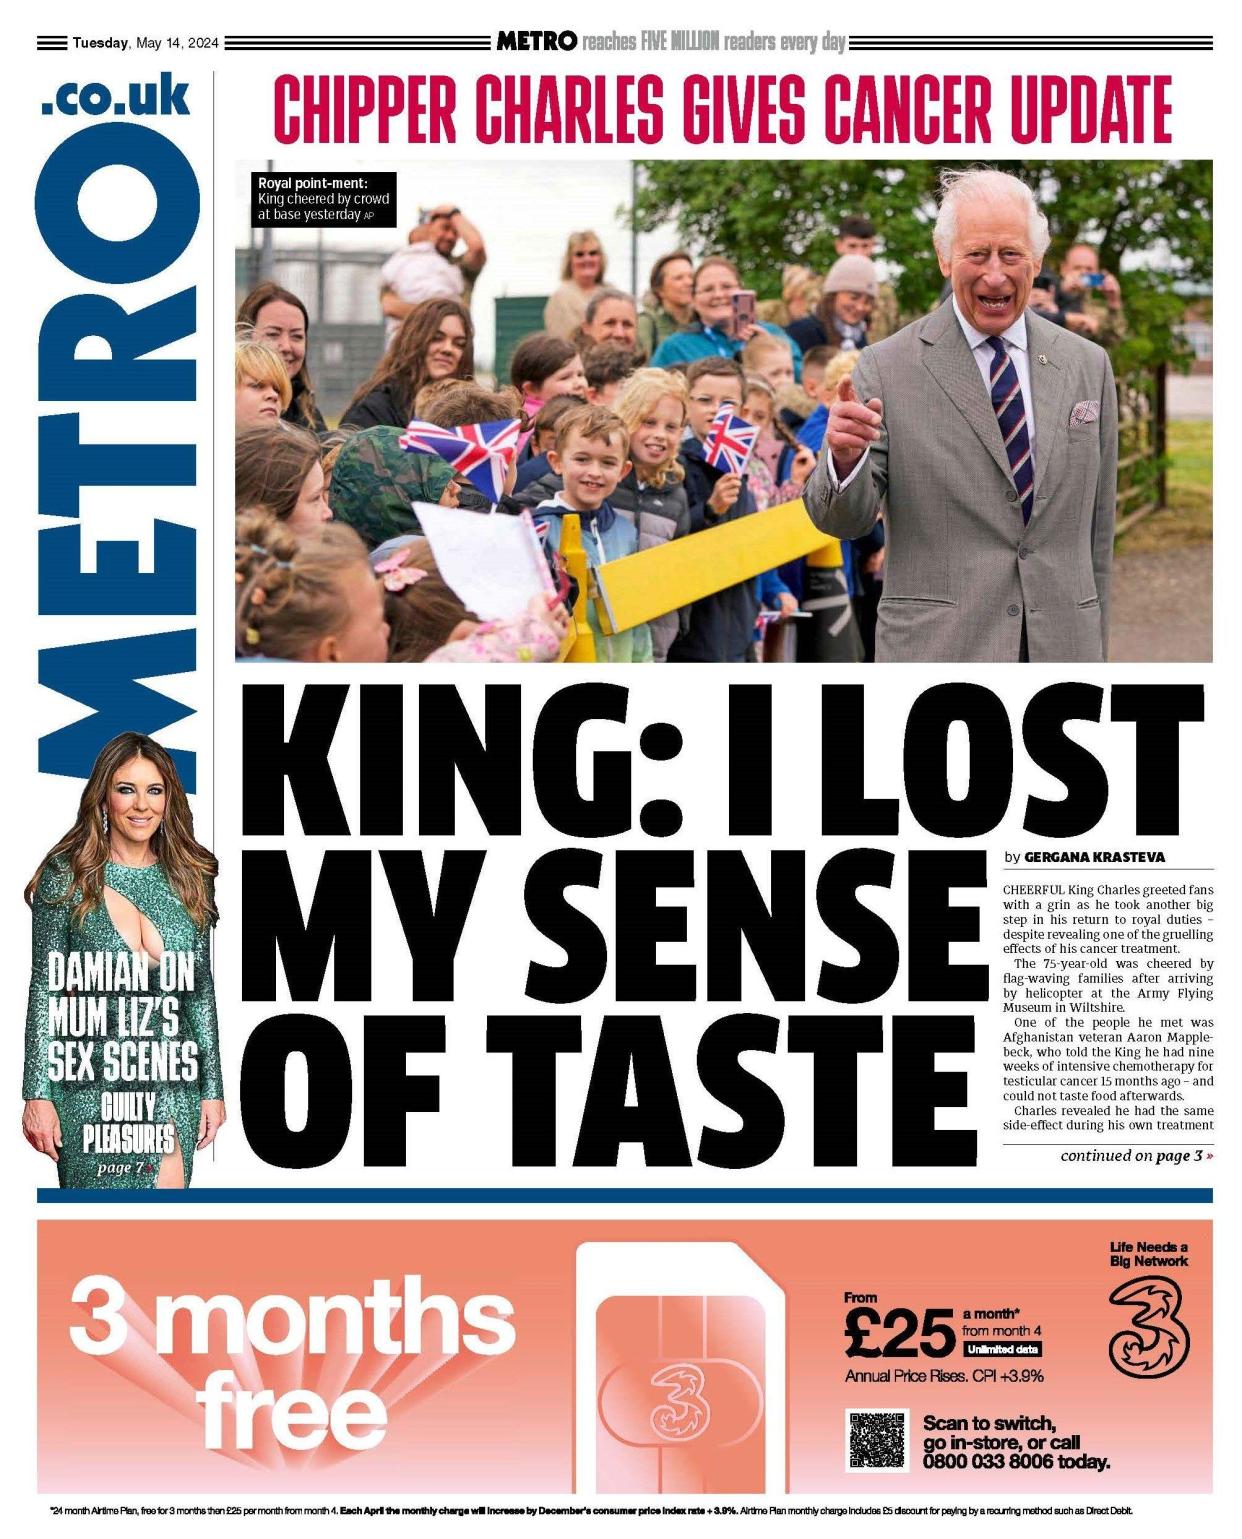 Metro's front page: King Charles Says He Lost His Sense of Taste From Cancer Treatment